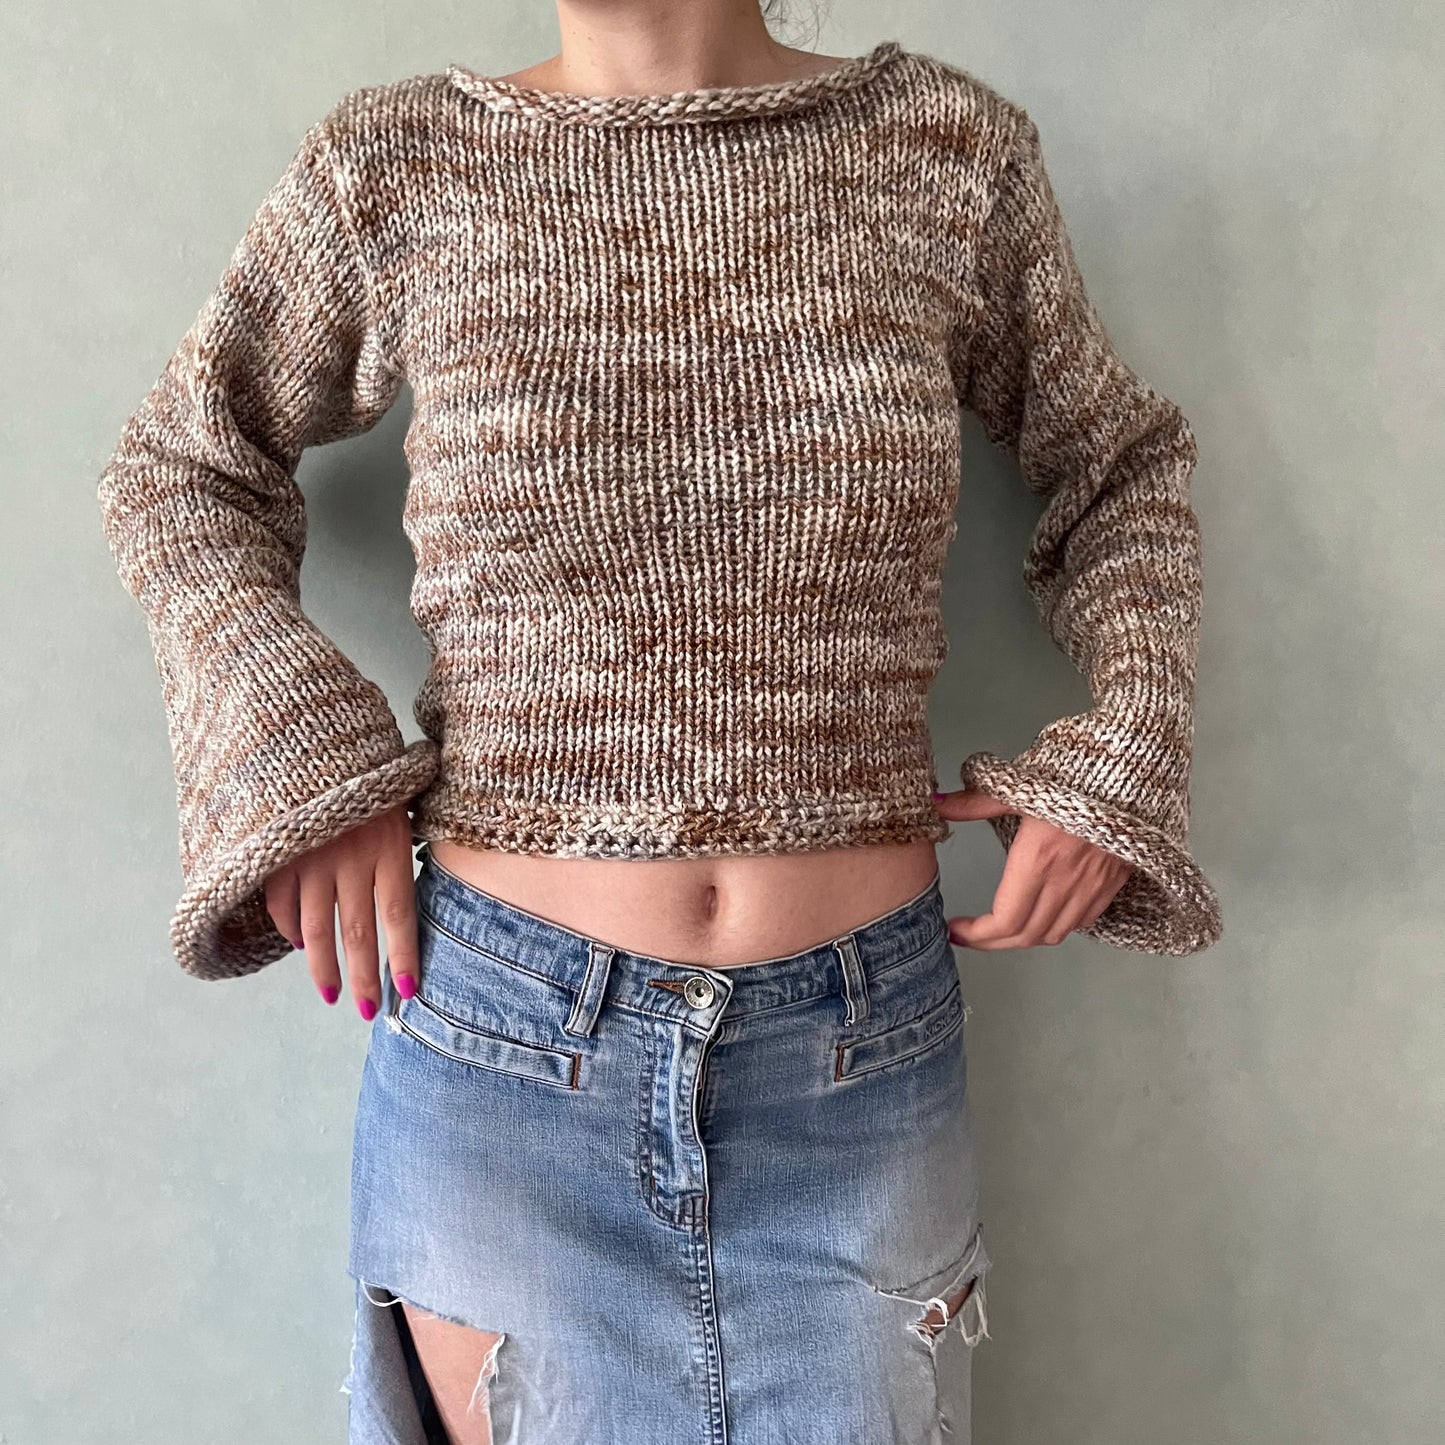 Handmade multicoloured beige, cream and brown knitted sweater